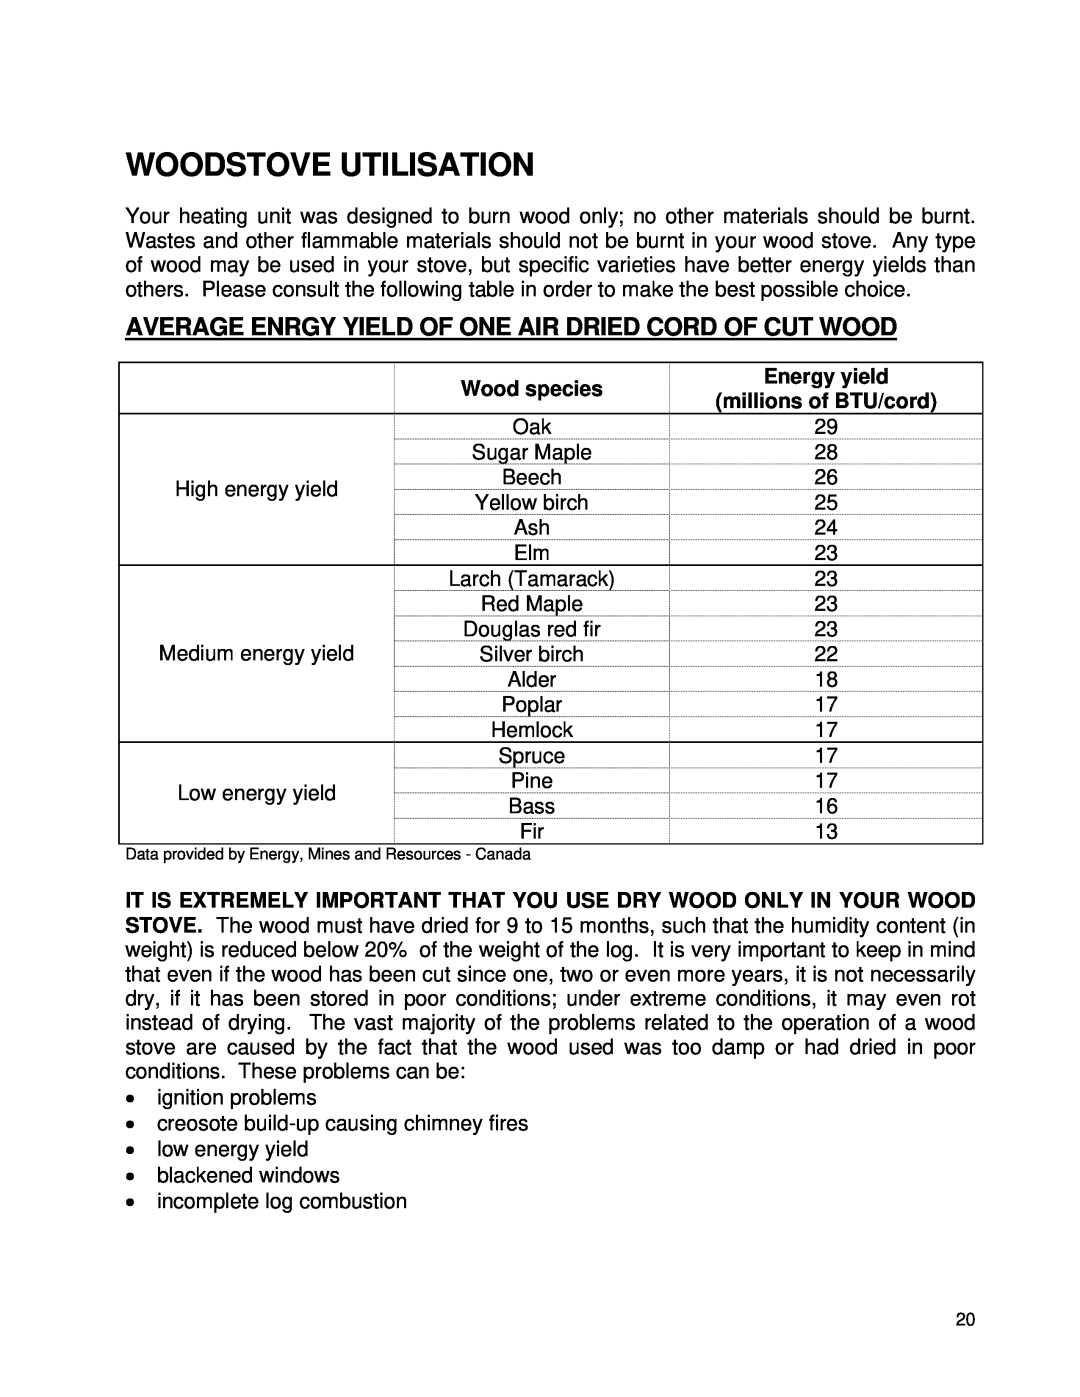 Drolet WOODSTOVES owner manual Woodstove Utilisation, Average Enrgy Yield Of One Air Dried Cord Of Cut Wood 